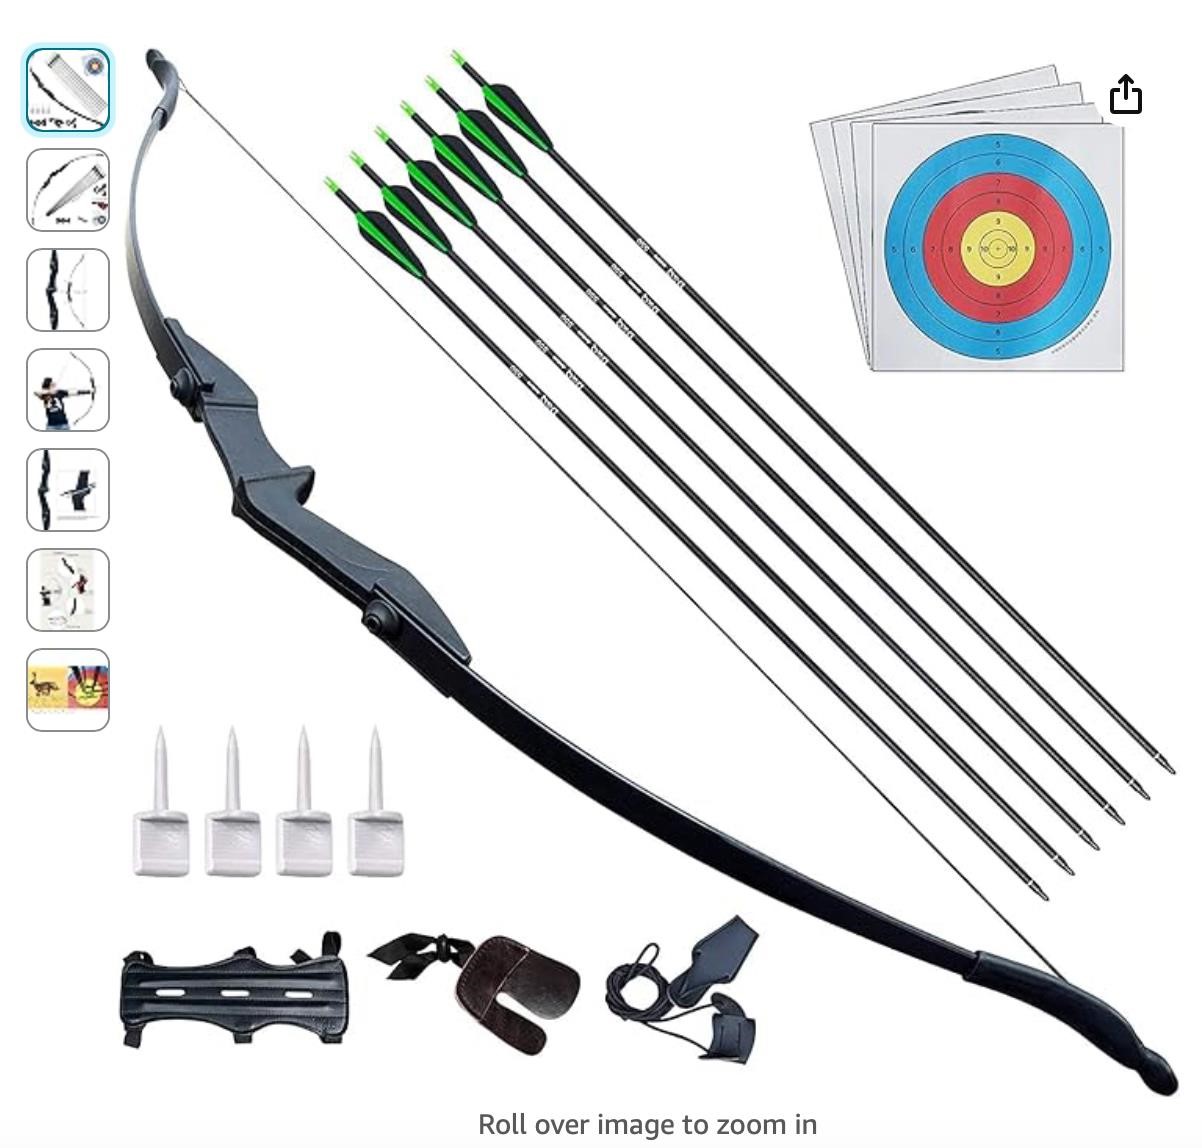 BZTANG Archery Recurve Takedown Bow and Arrow